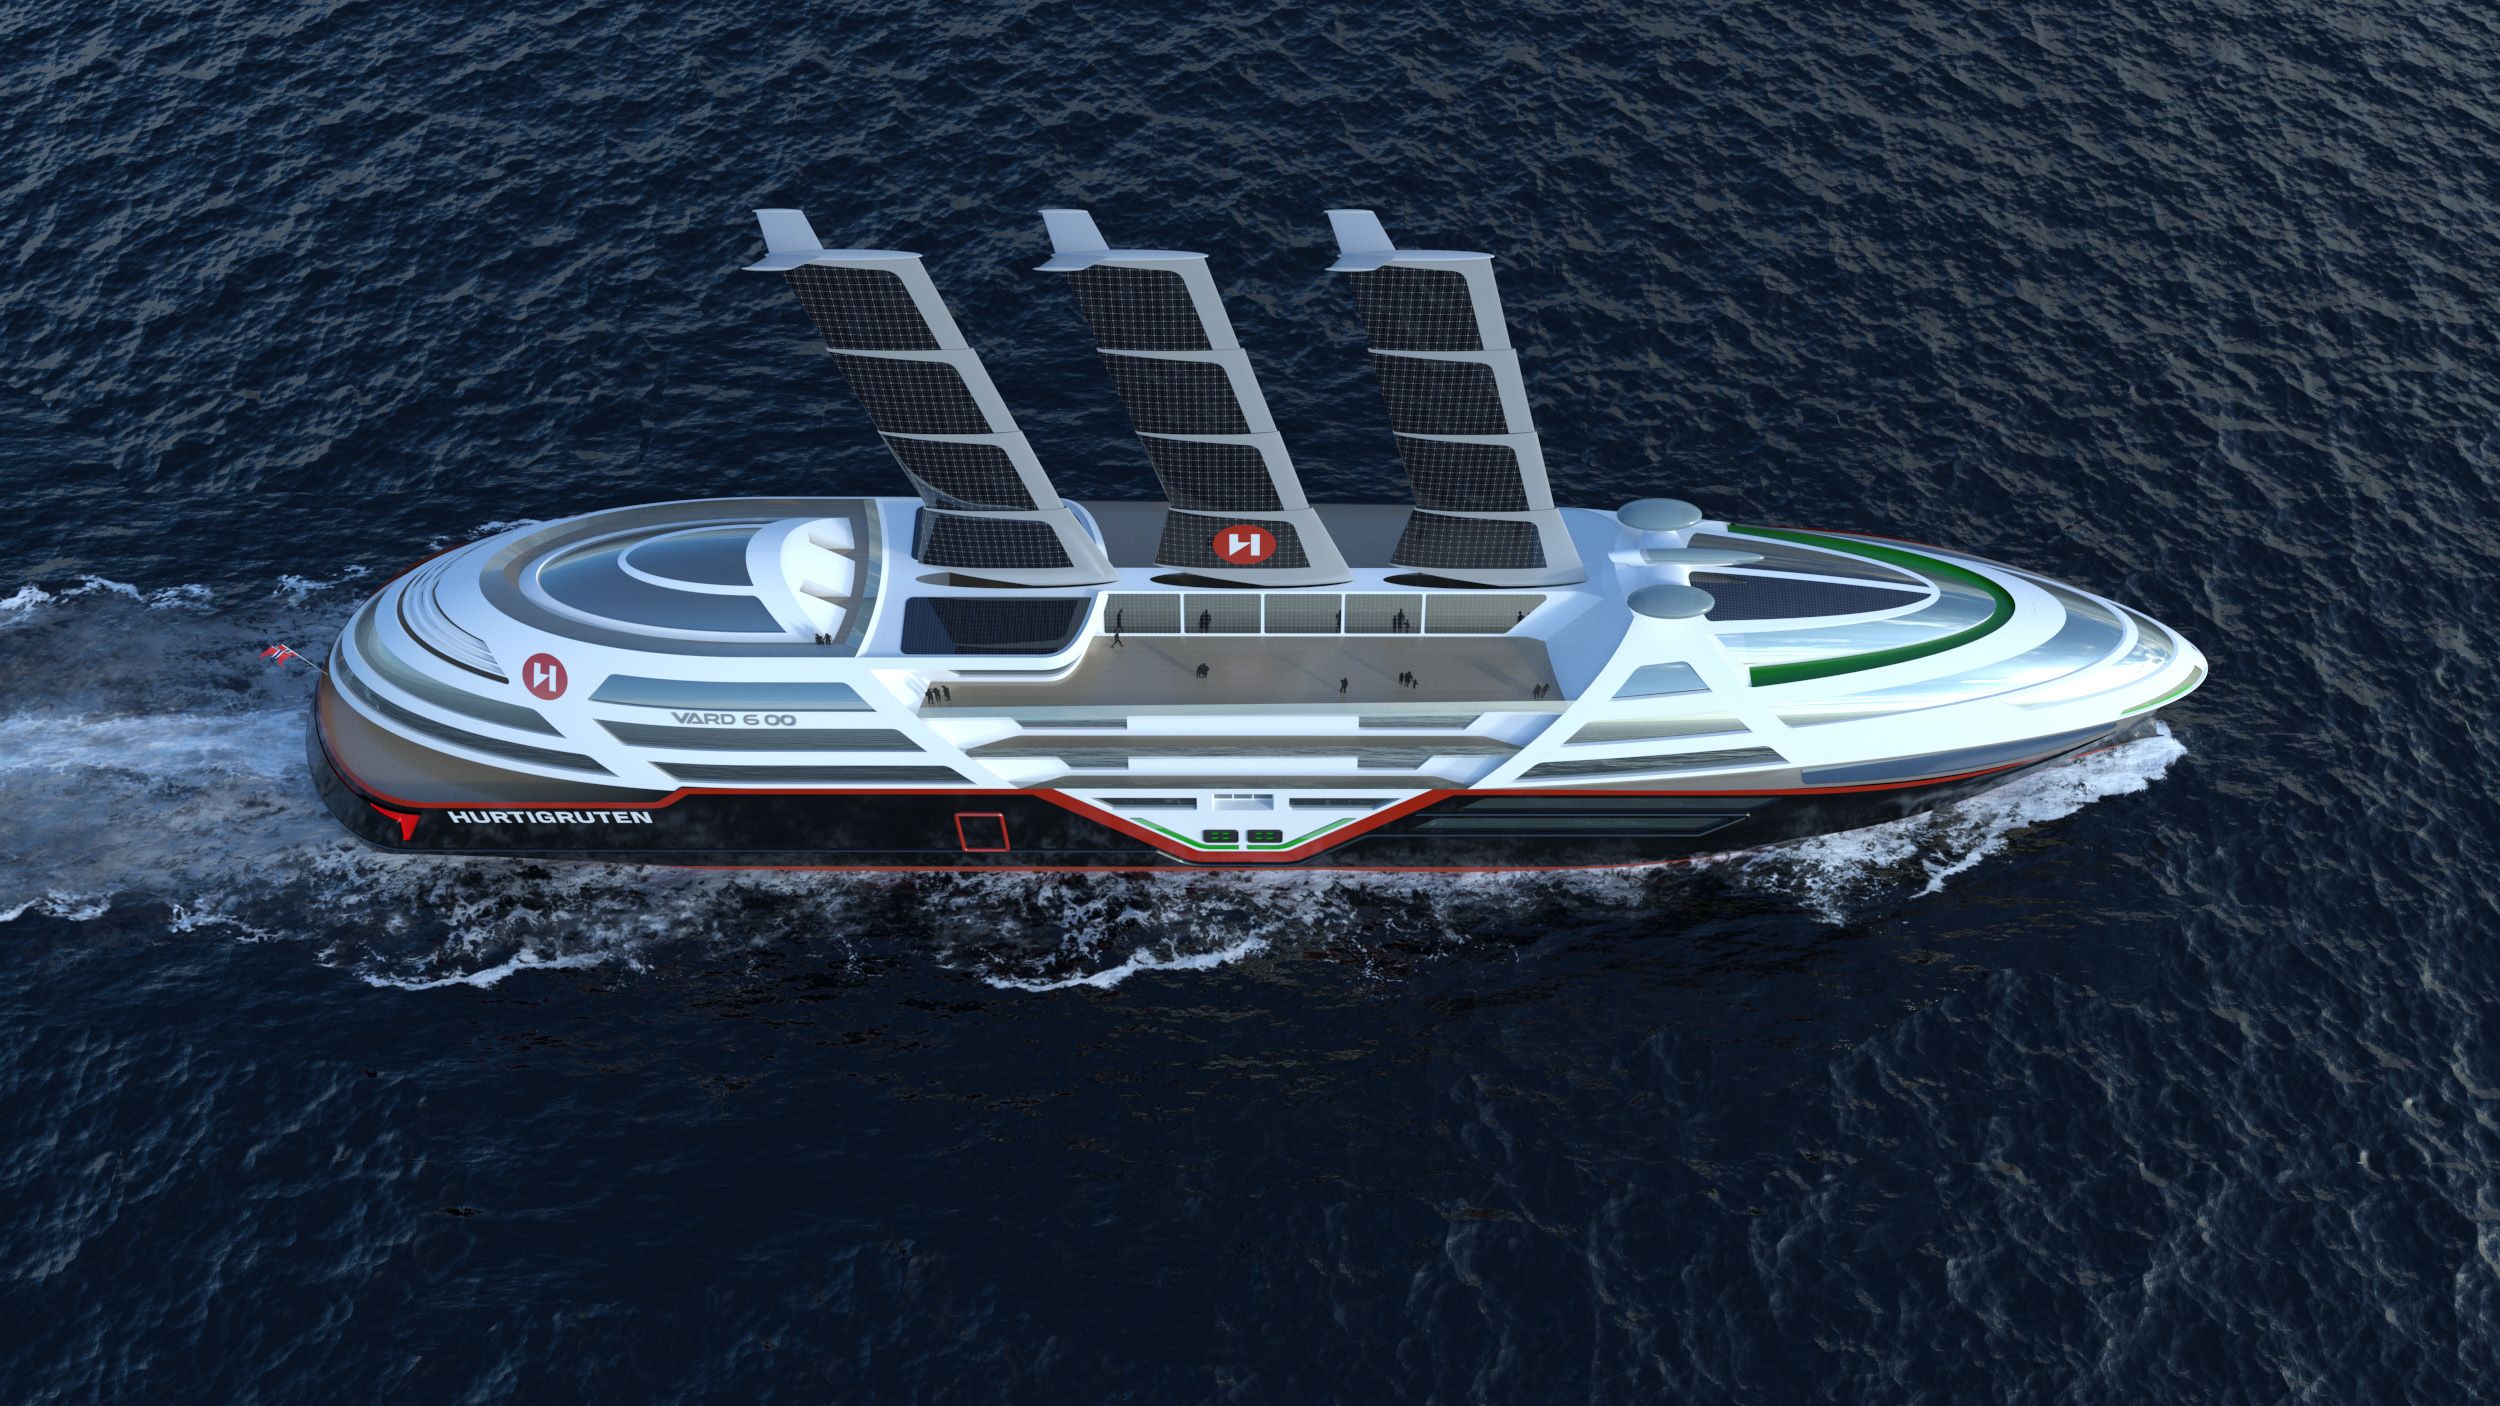 This New All-Electric Boat Could Change Day Cruising as We Know It